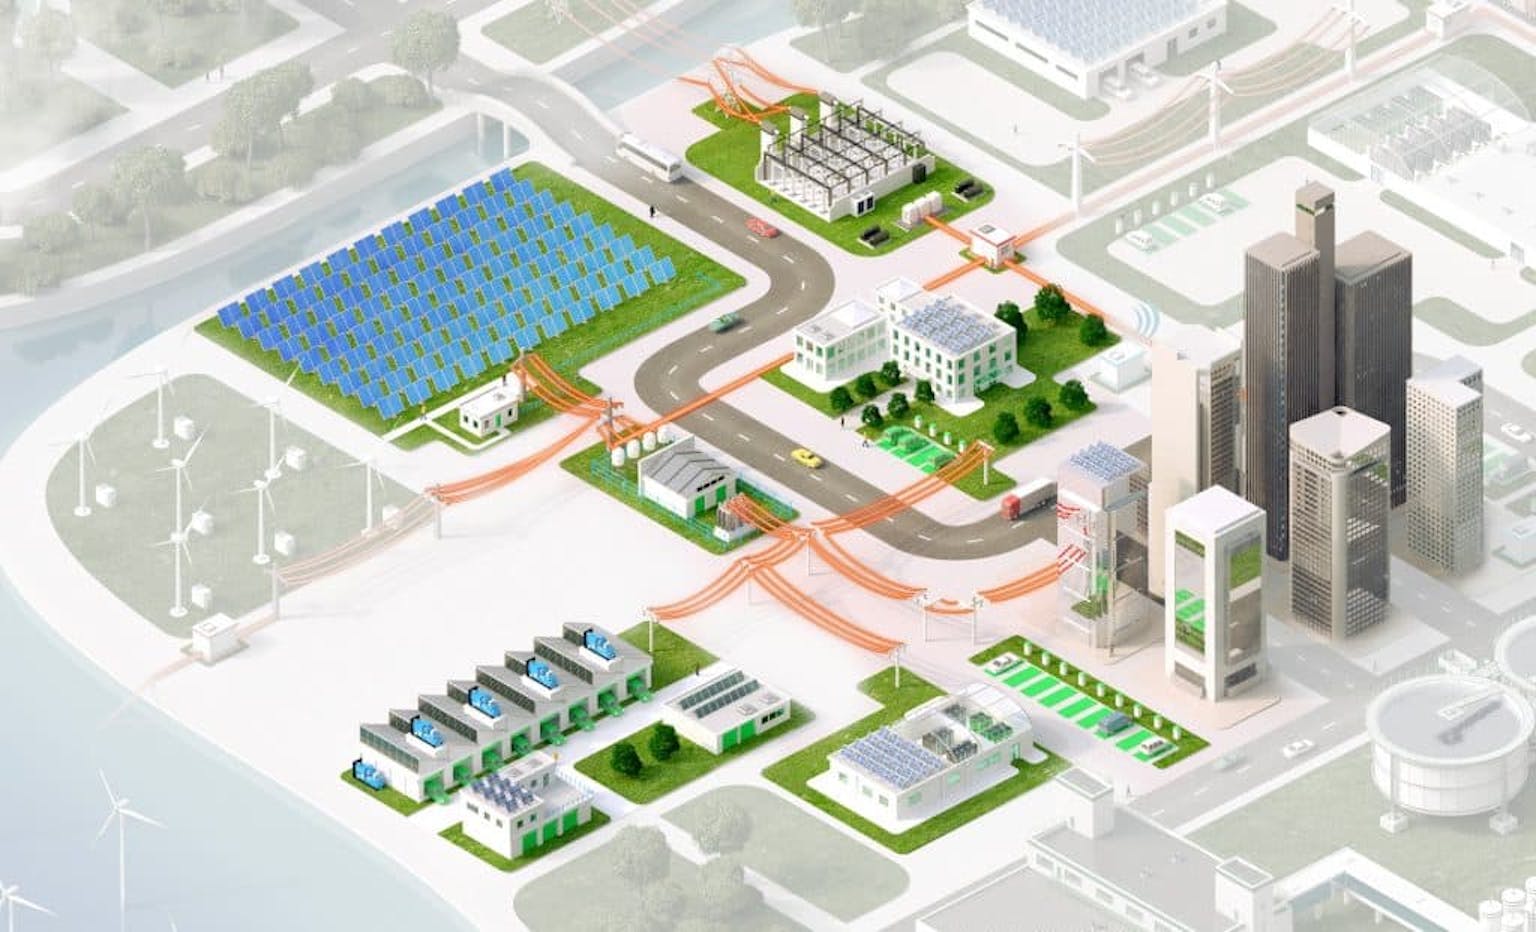 designing microgrid energy markets a case study the brooklyn microgrid